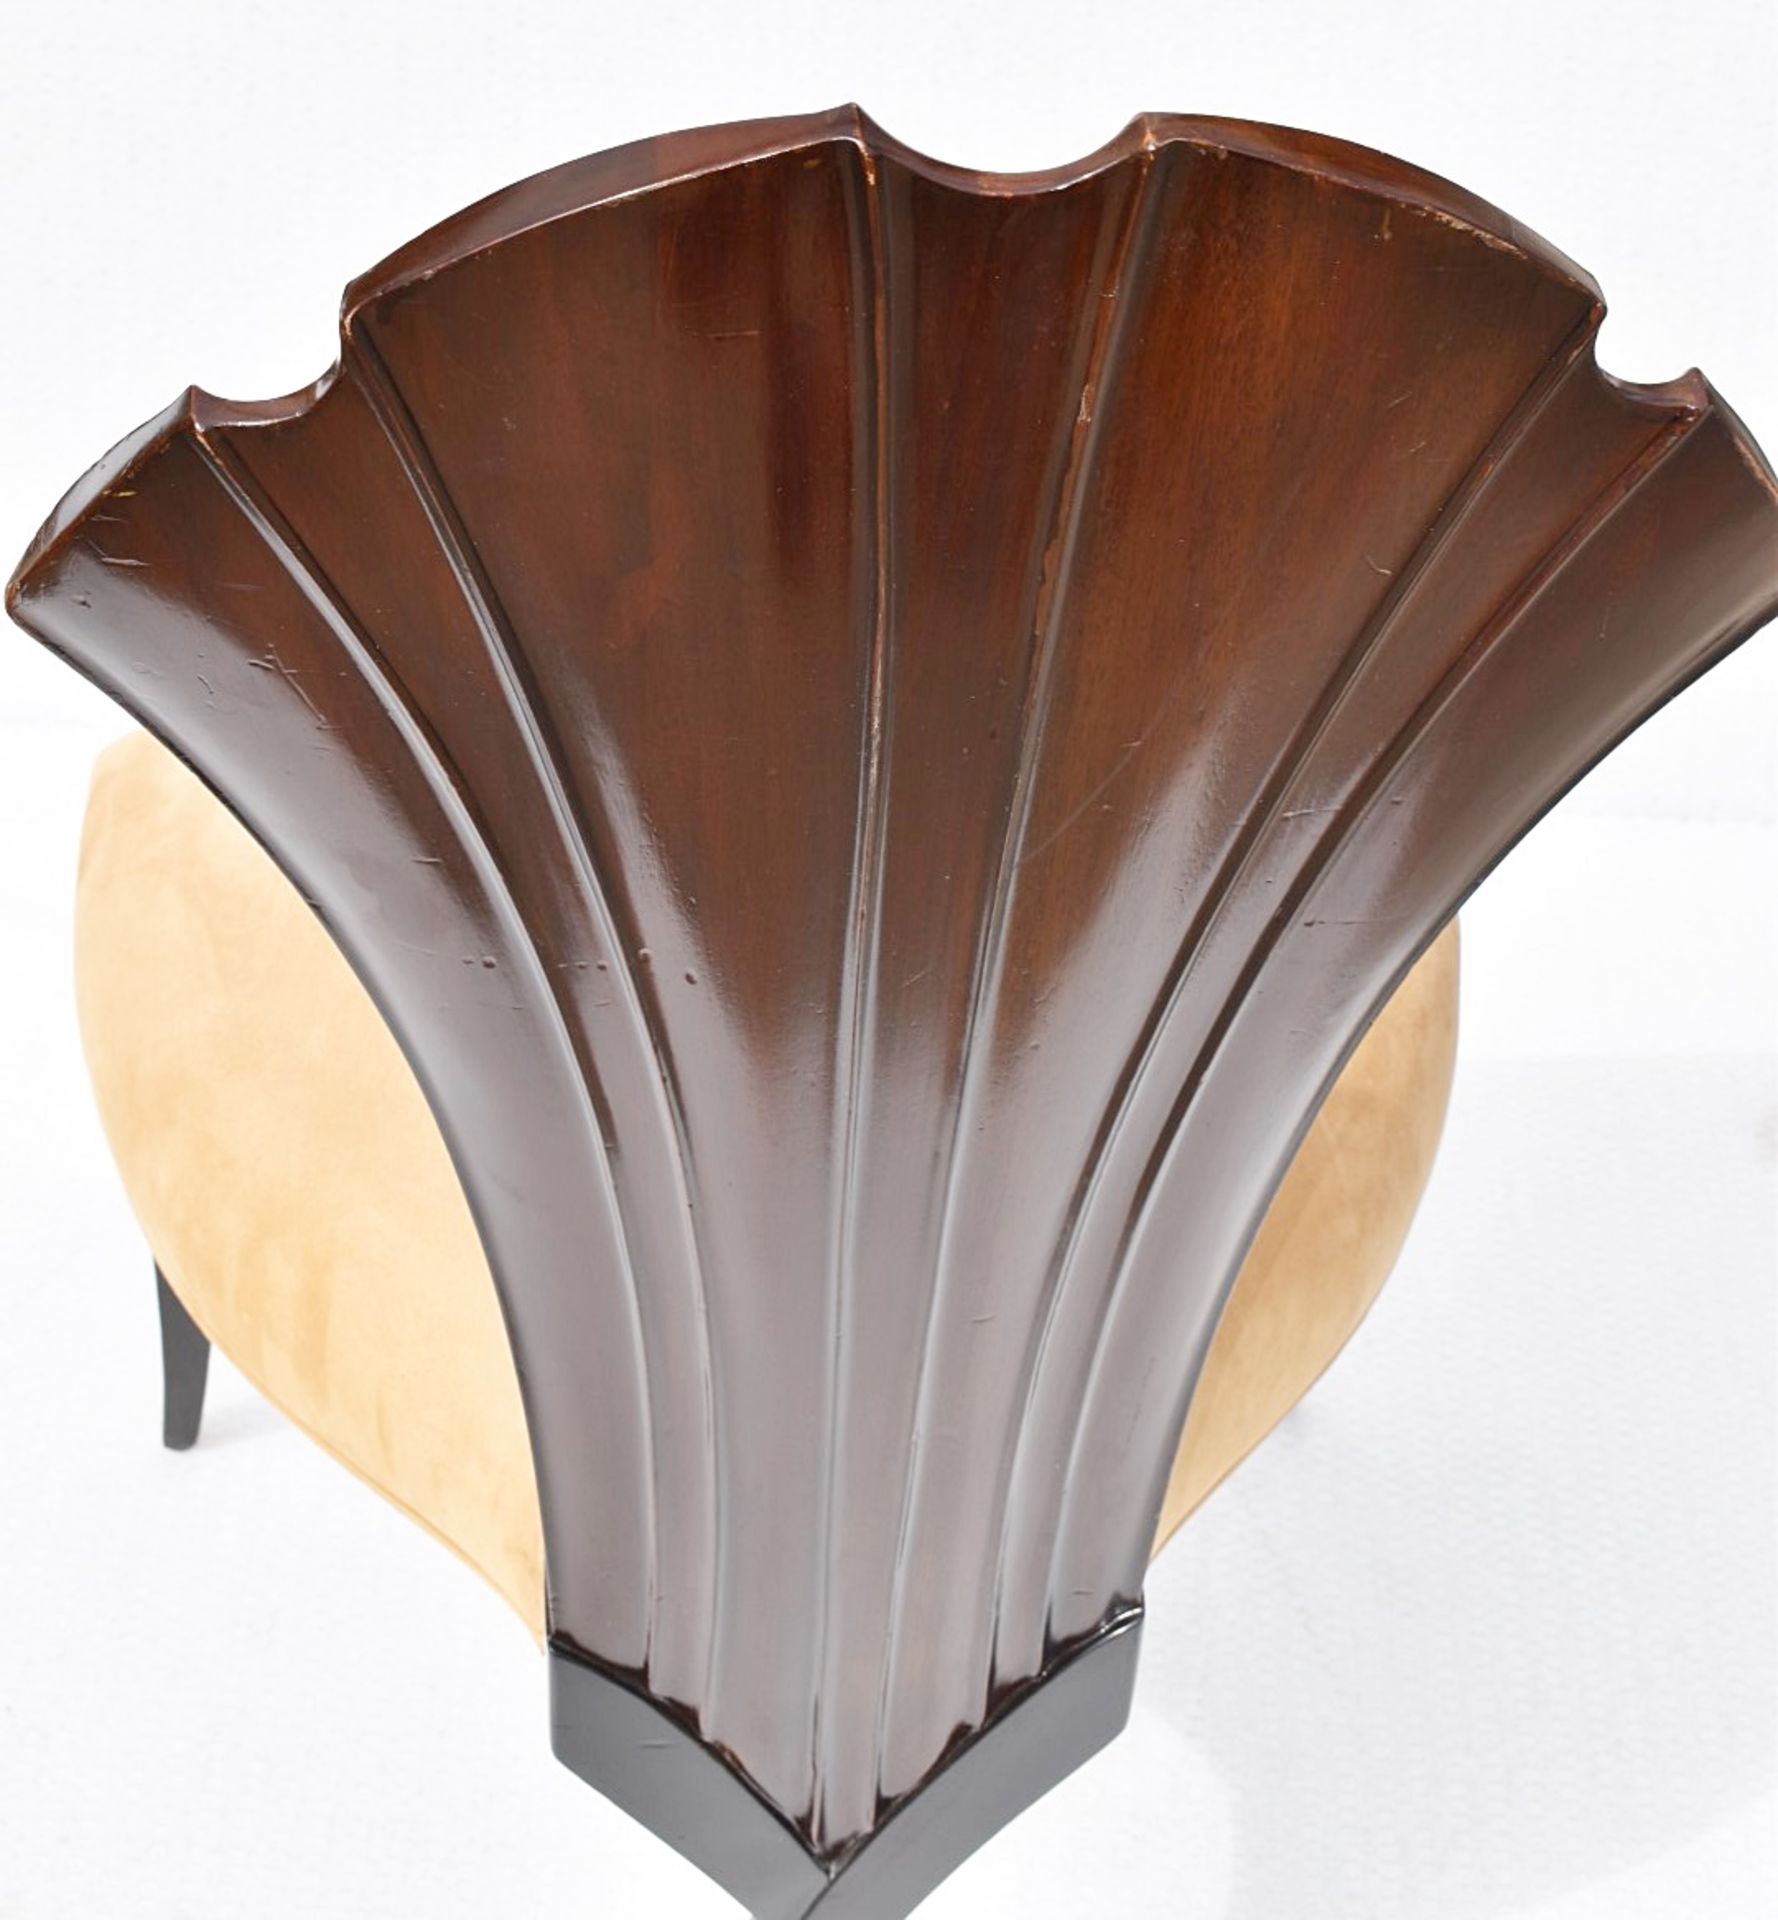 4 x CHRISTOPHER GUY 'La Croisette' Luxury Hand-carved Solid Mahogany Designer Dining Chairs - - Image 4 of 11